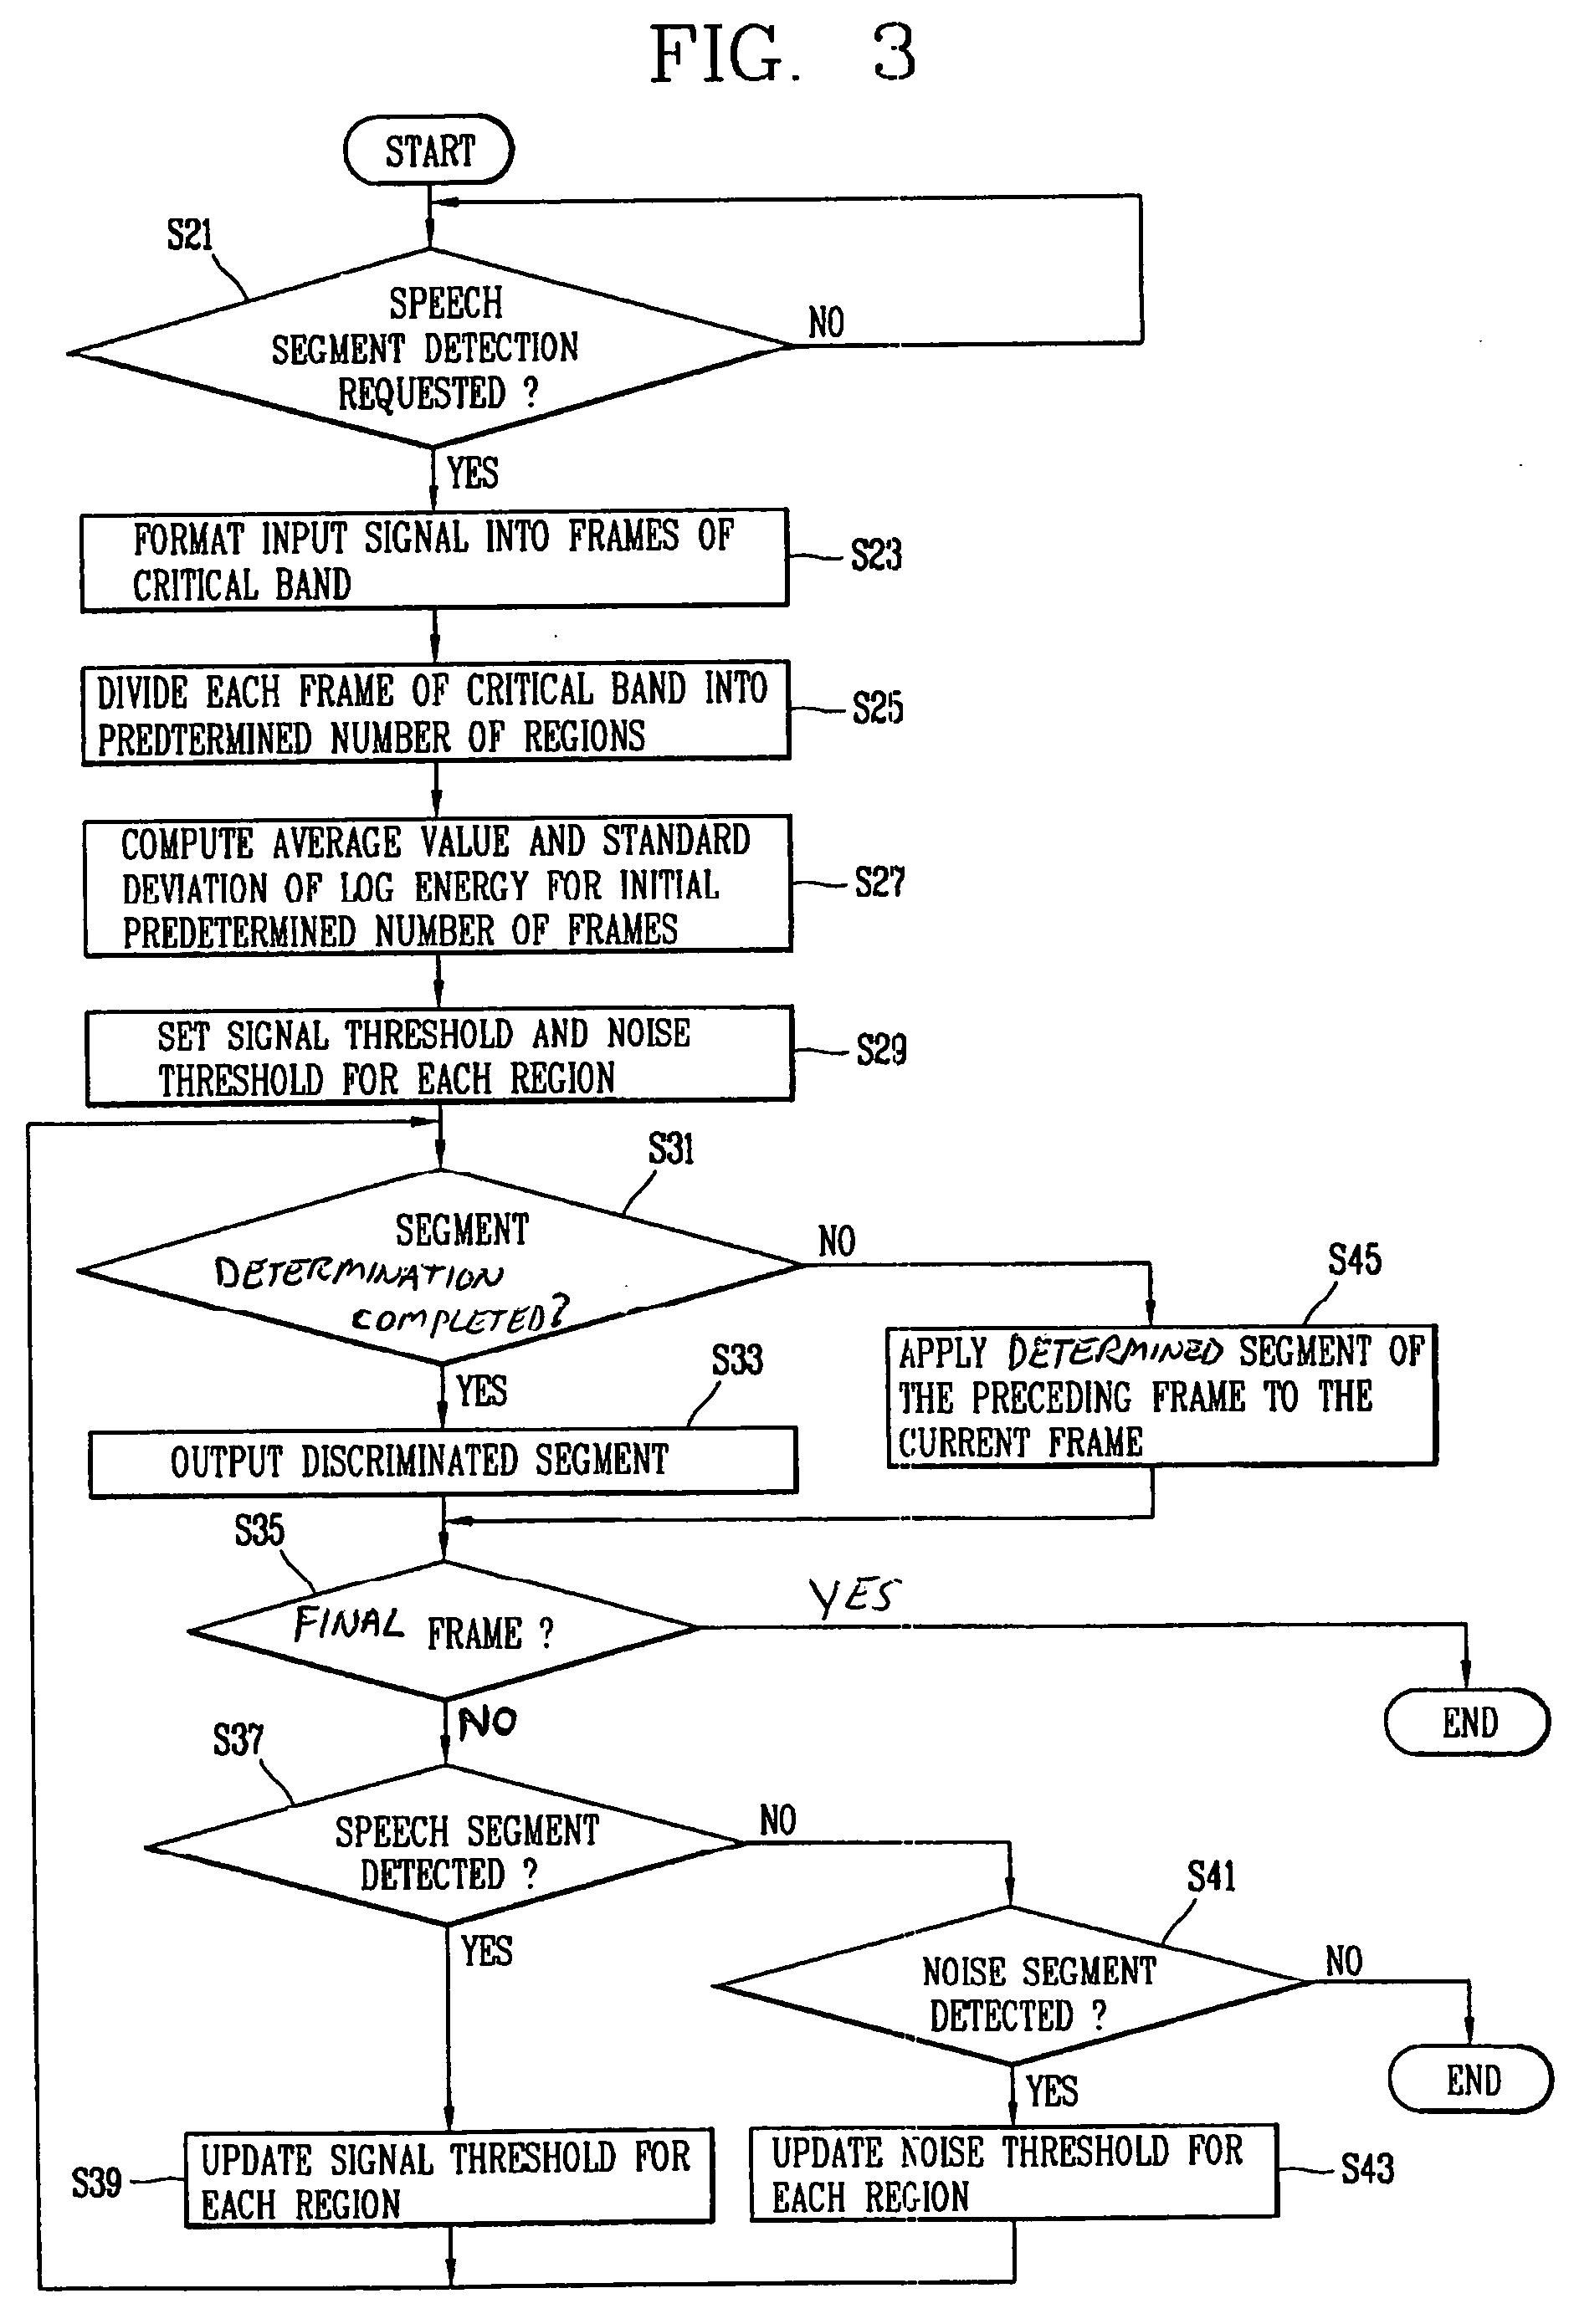 Method and apparatus for detecting speech segments in speech signal processing